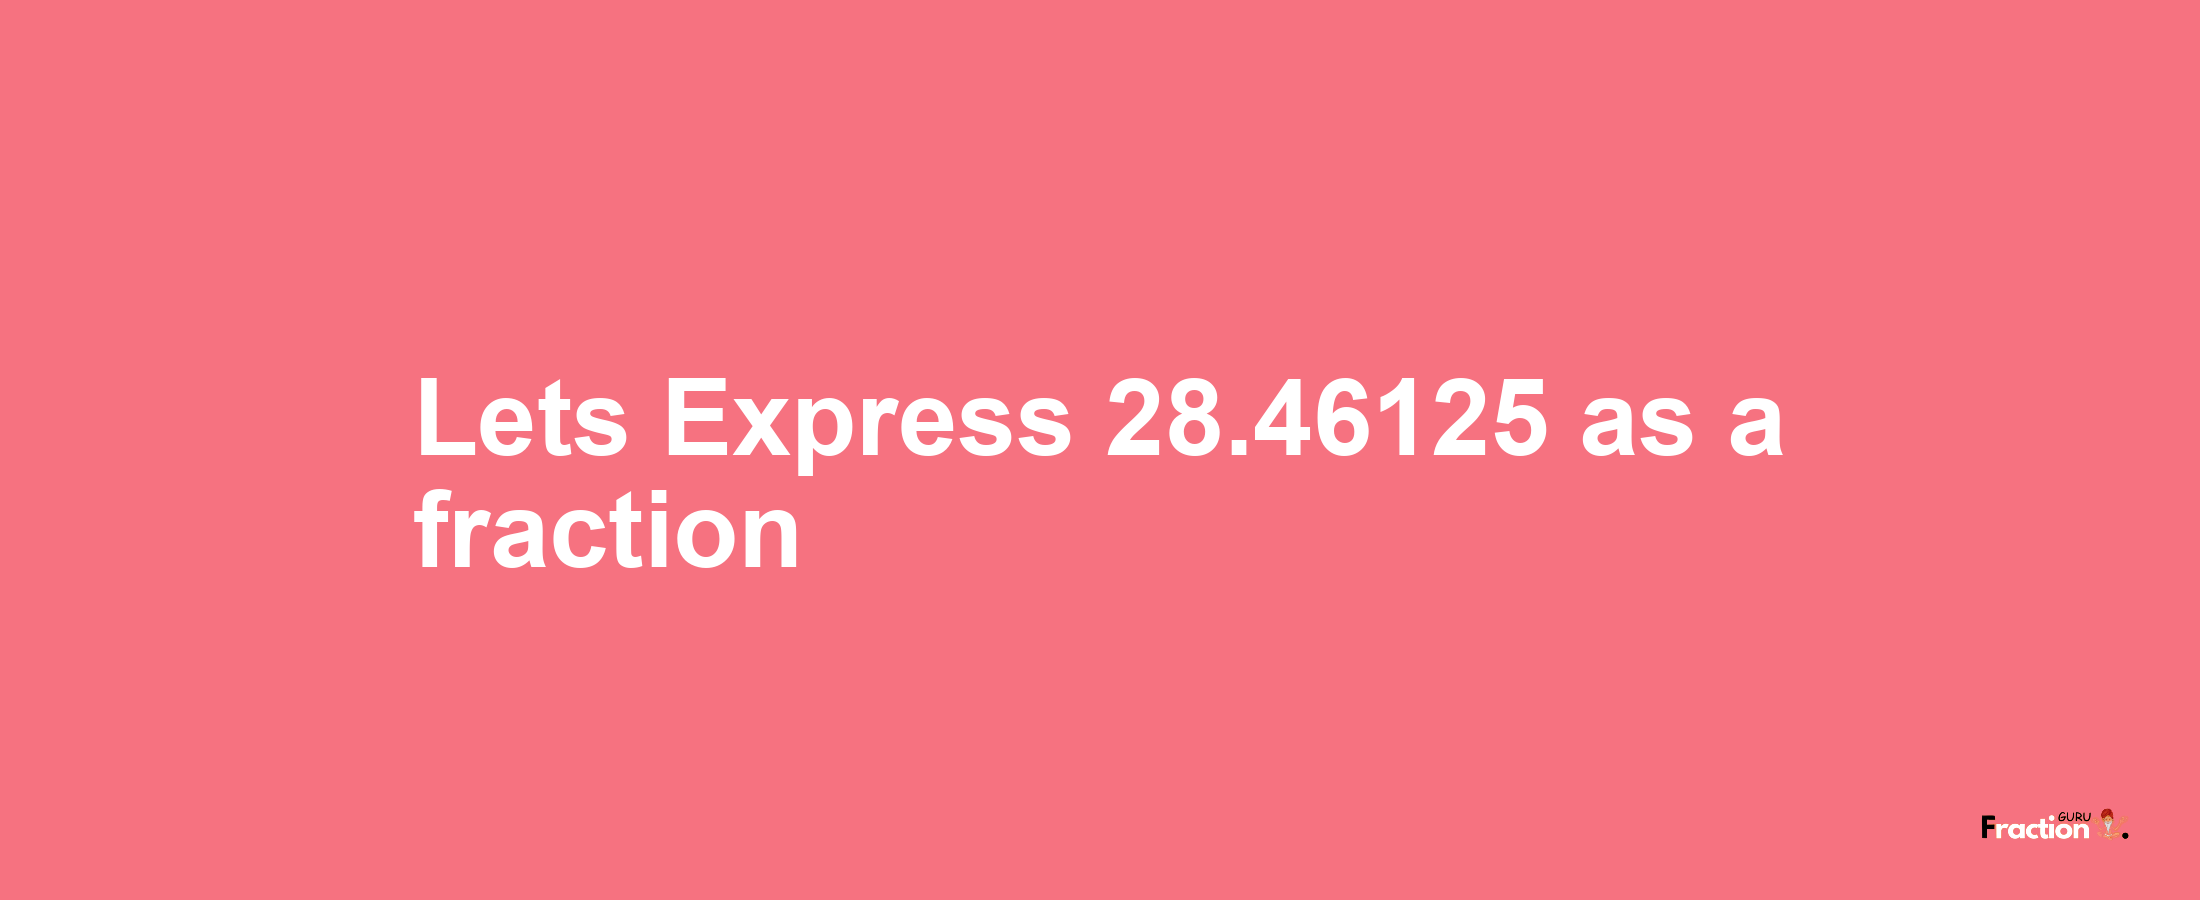 Lets Express 28.46125 as afraction